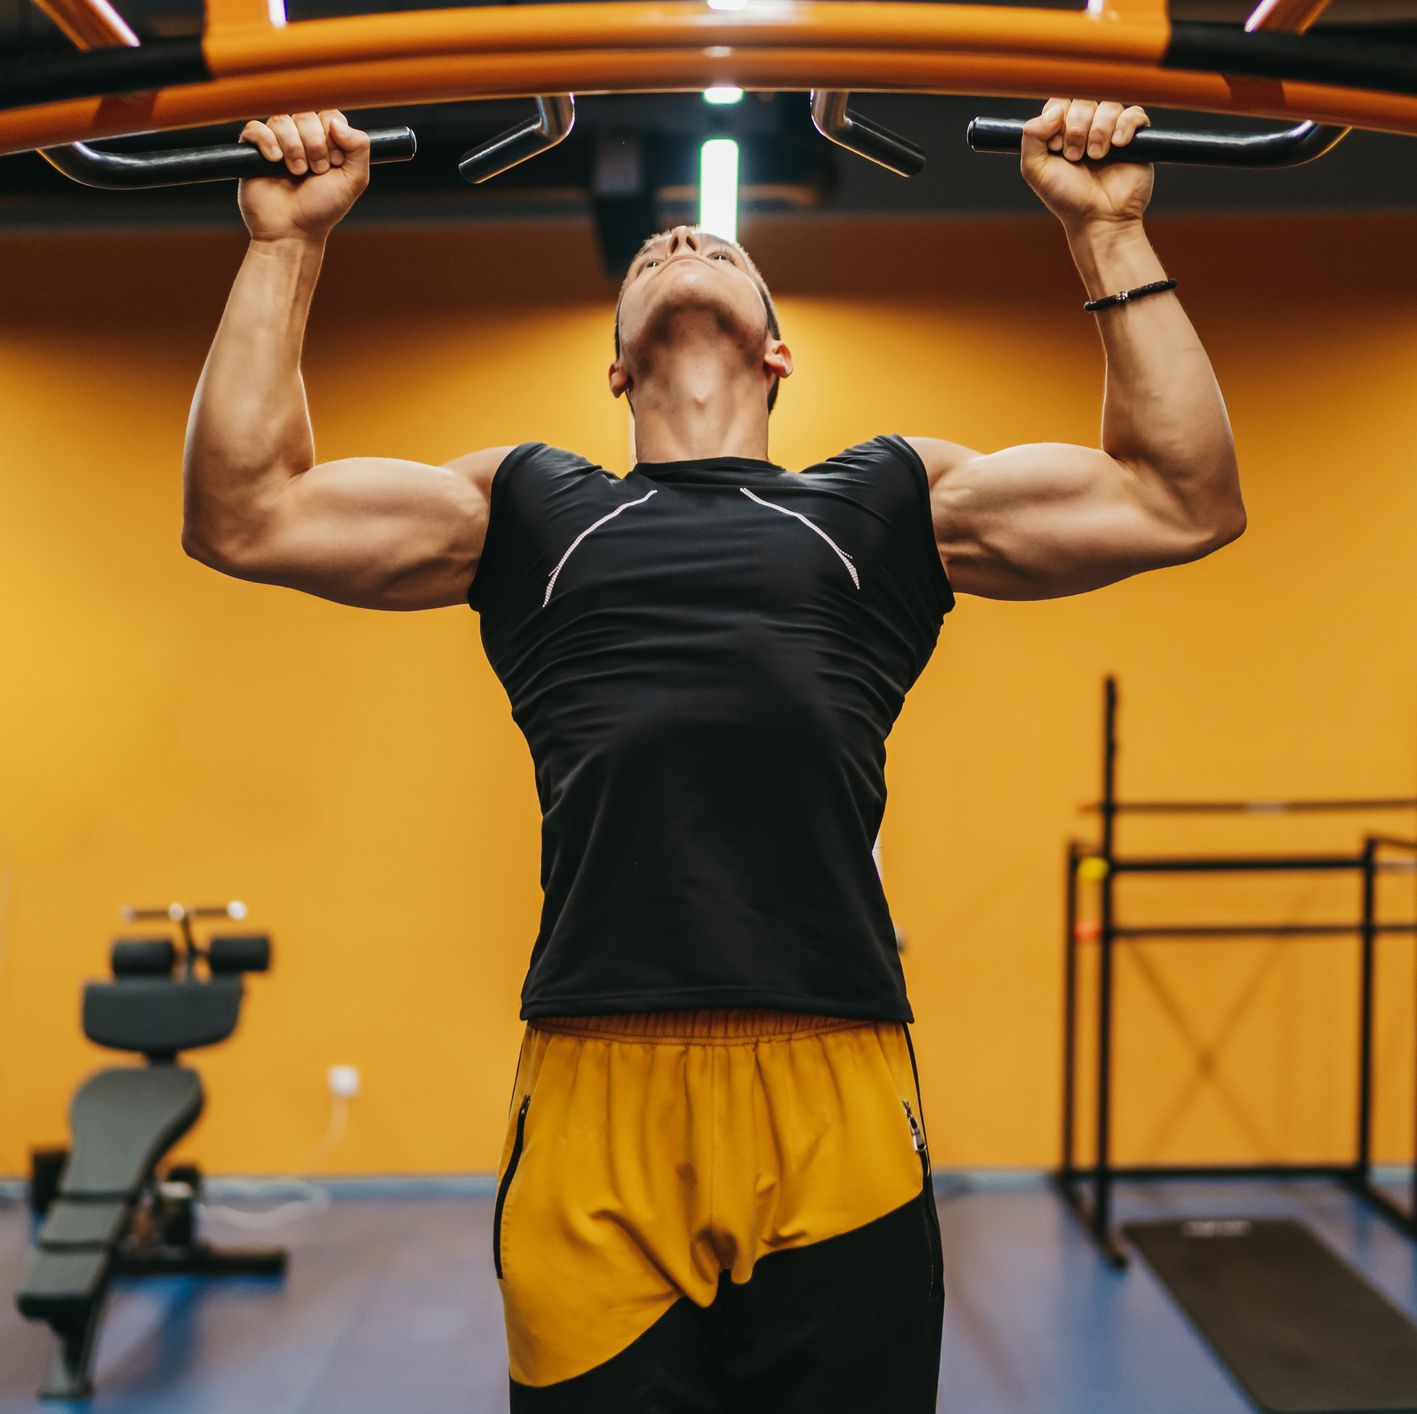 A Top Trainer Shares His 4-Step Plan to Help Achieve Your First Pullup